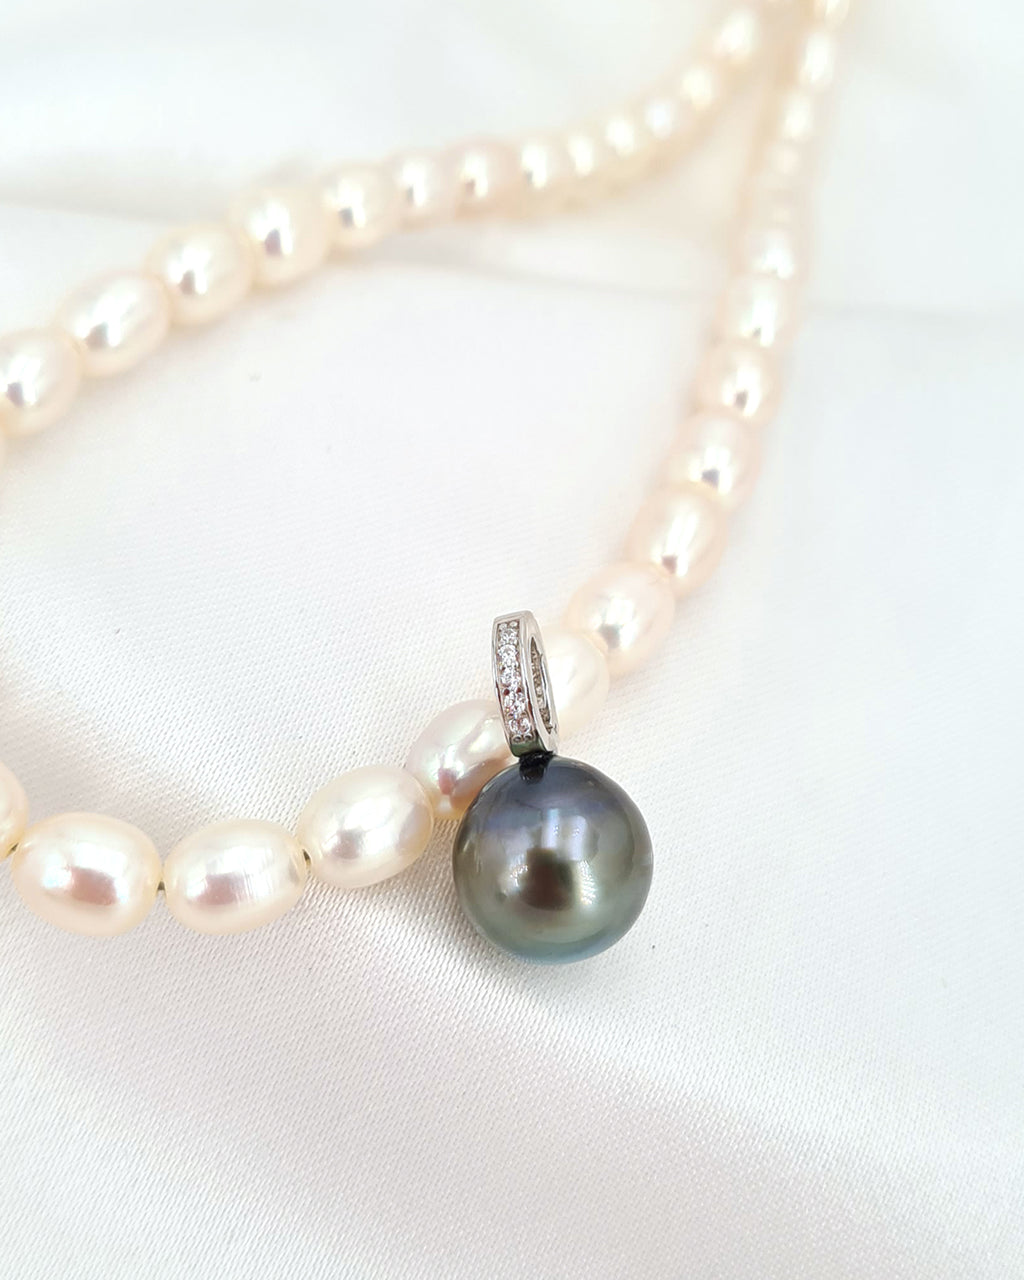 11-12mm Real Pearls Necklace, Freshwater Cultured Pearls in Sterling Silver Toggle Clasp Necklace, Pearls Silver Clasp Necklace